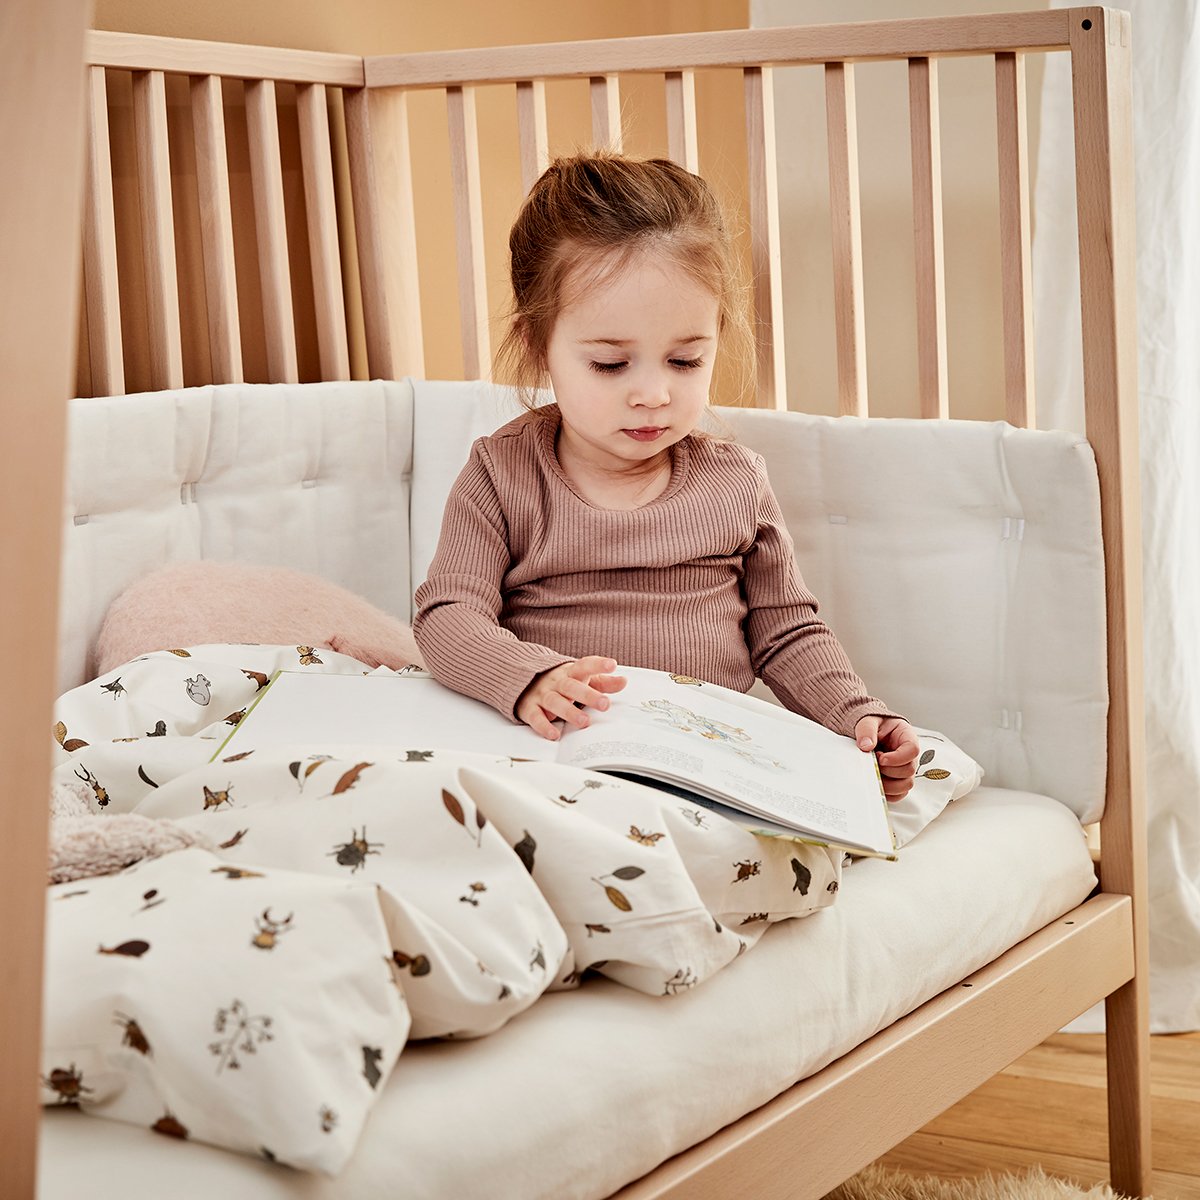 Factors To Consider When Buying Bedding For Your Child